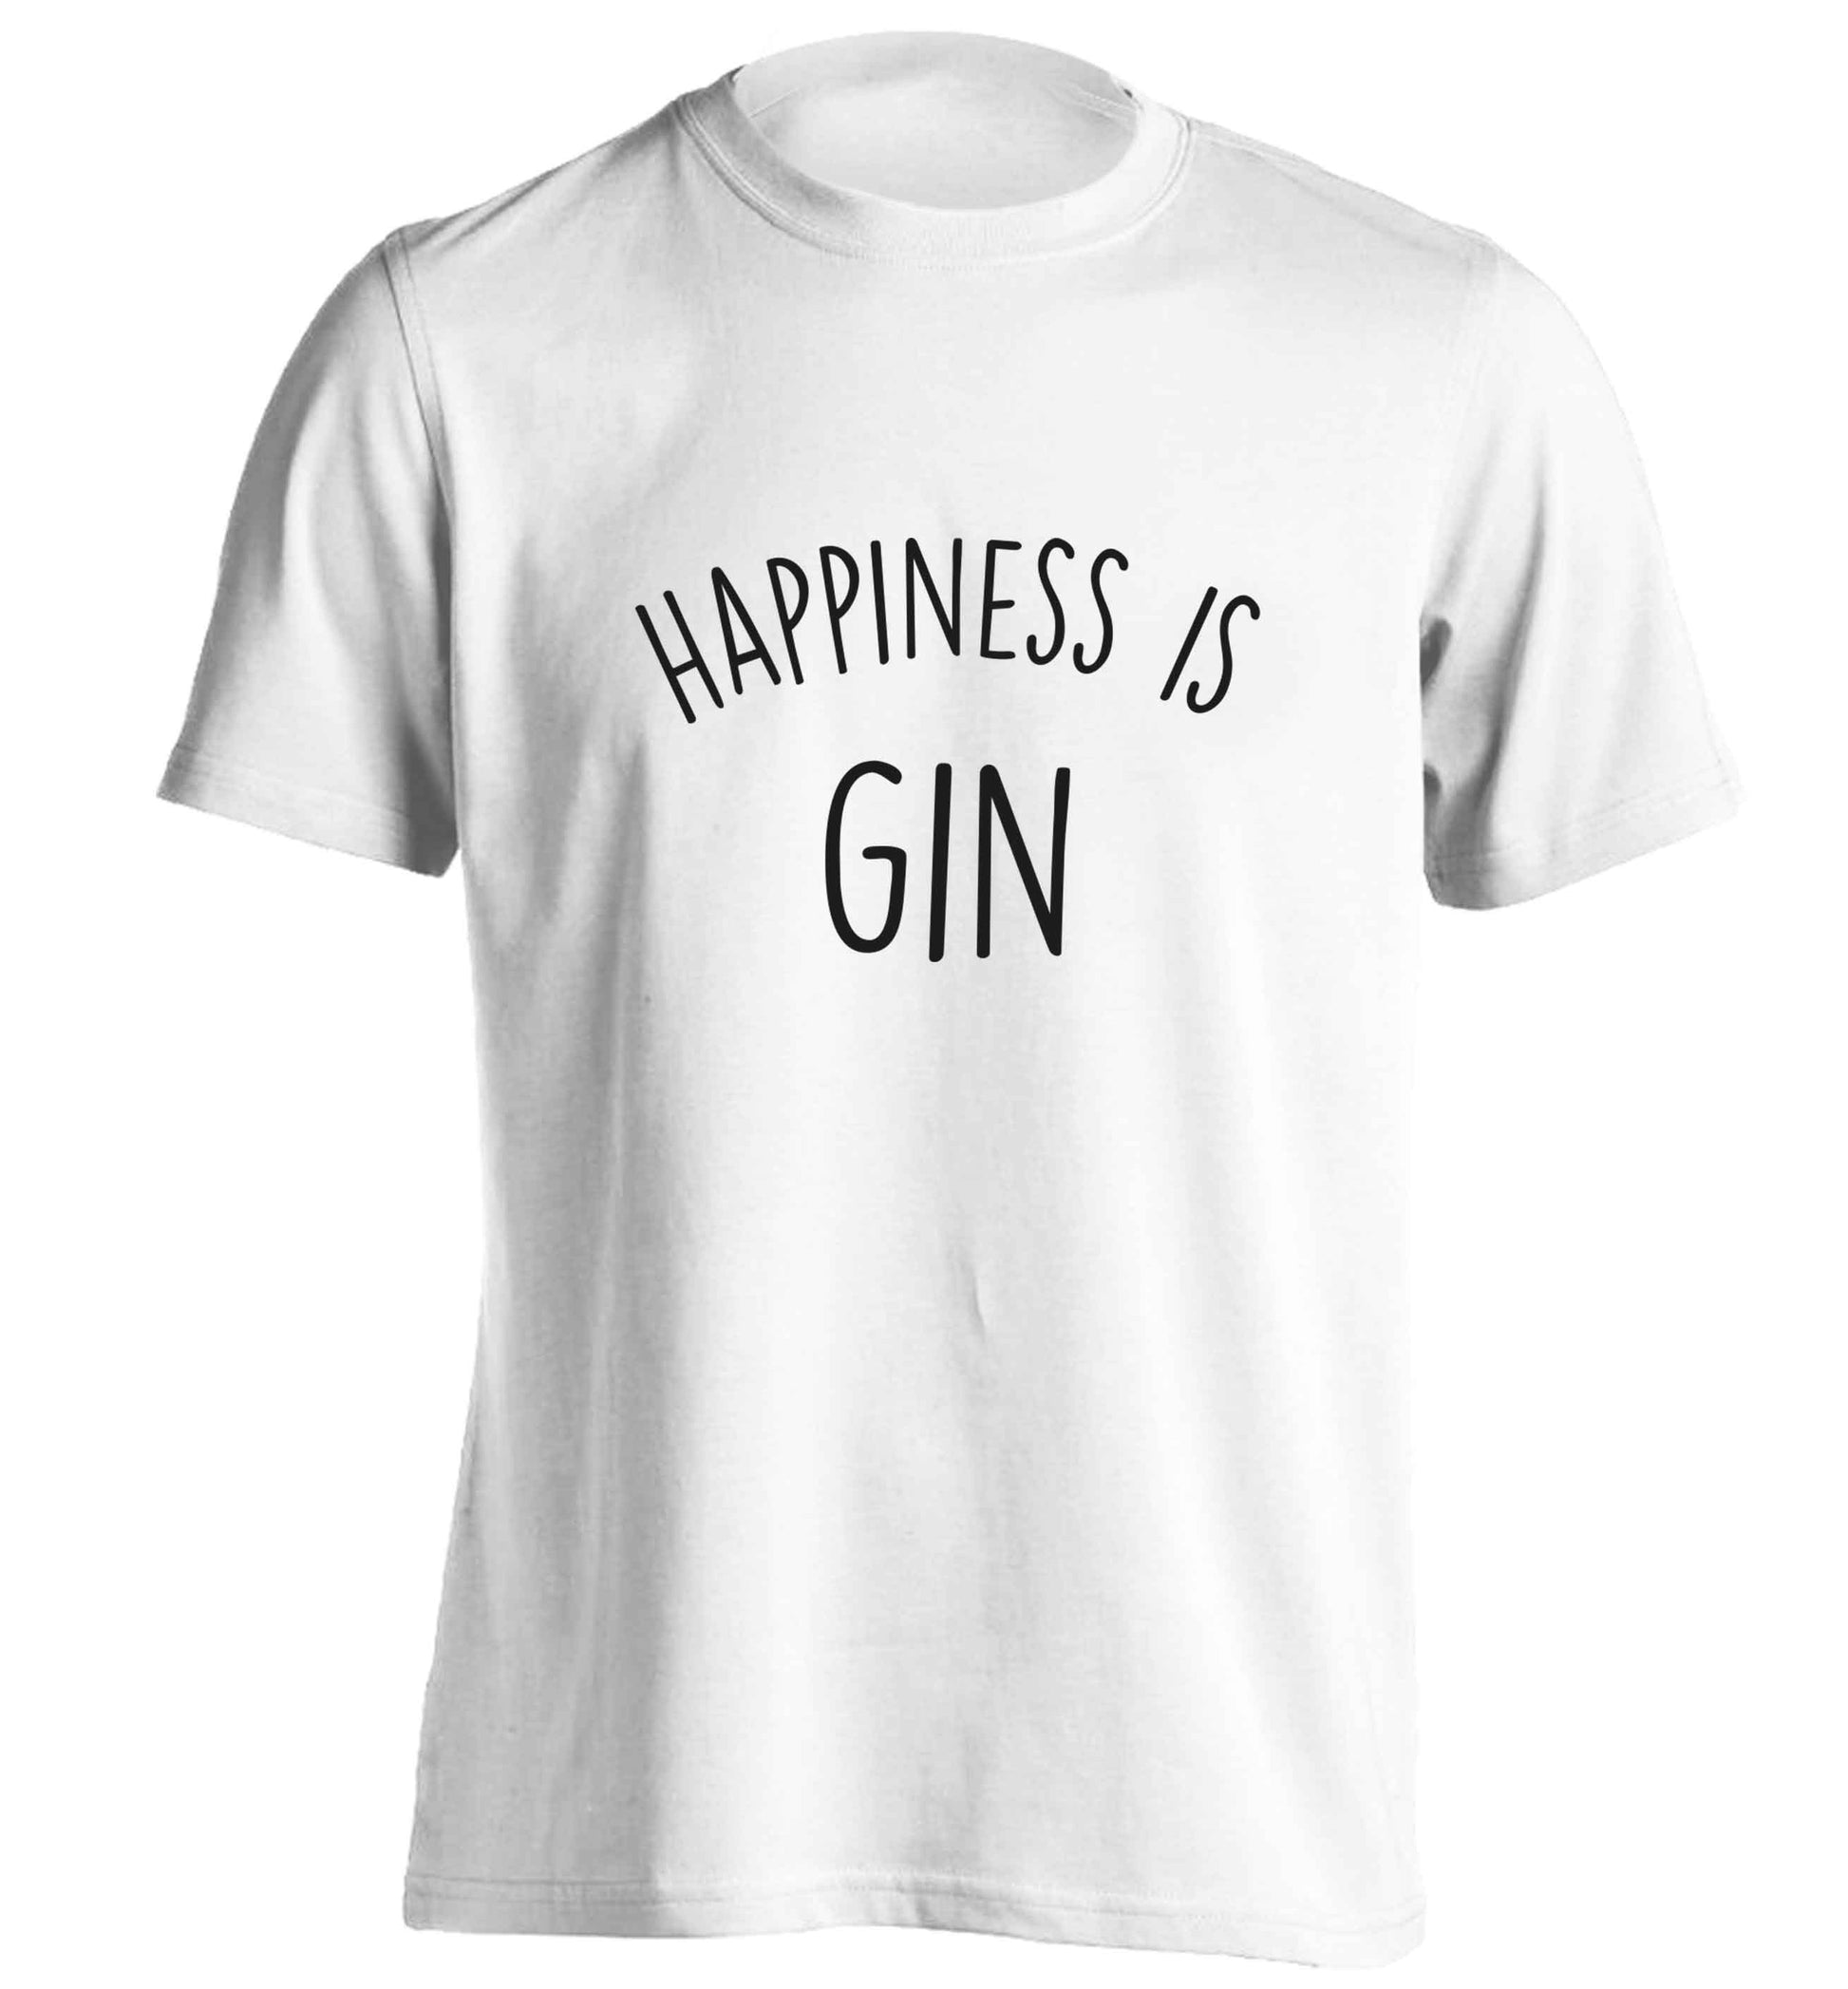 Happiness is gin adults unisex white Tshirt 2XL